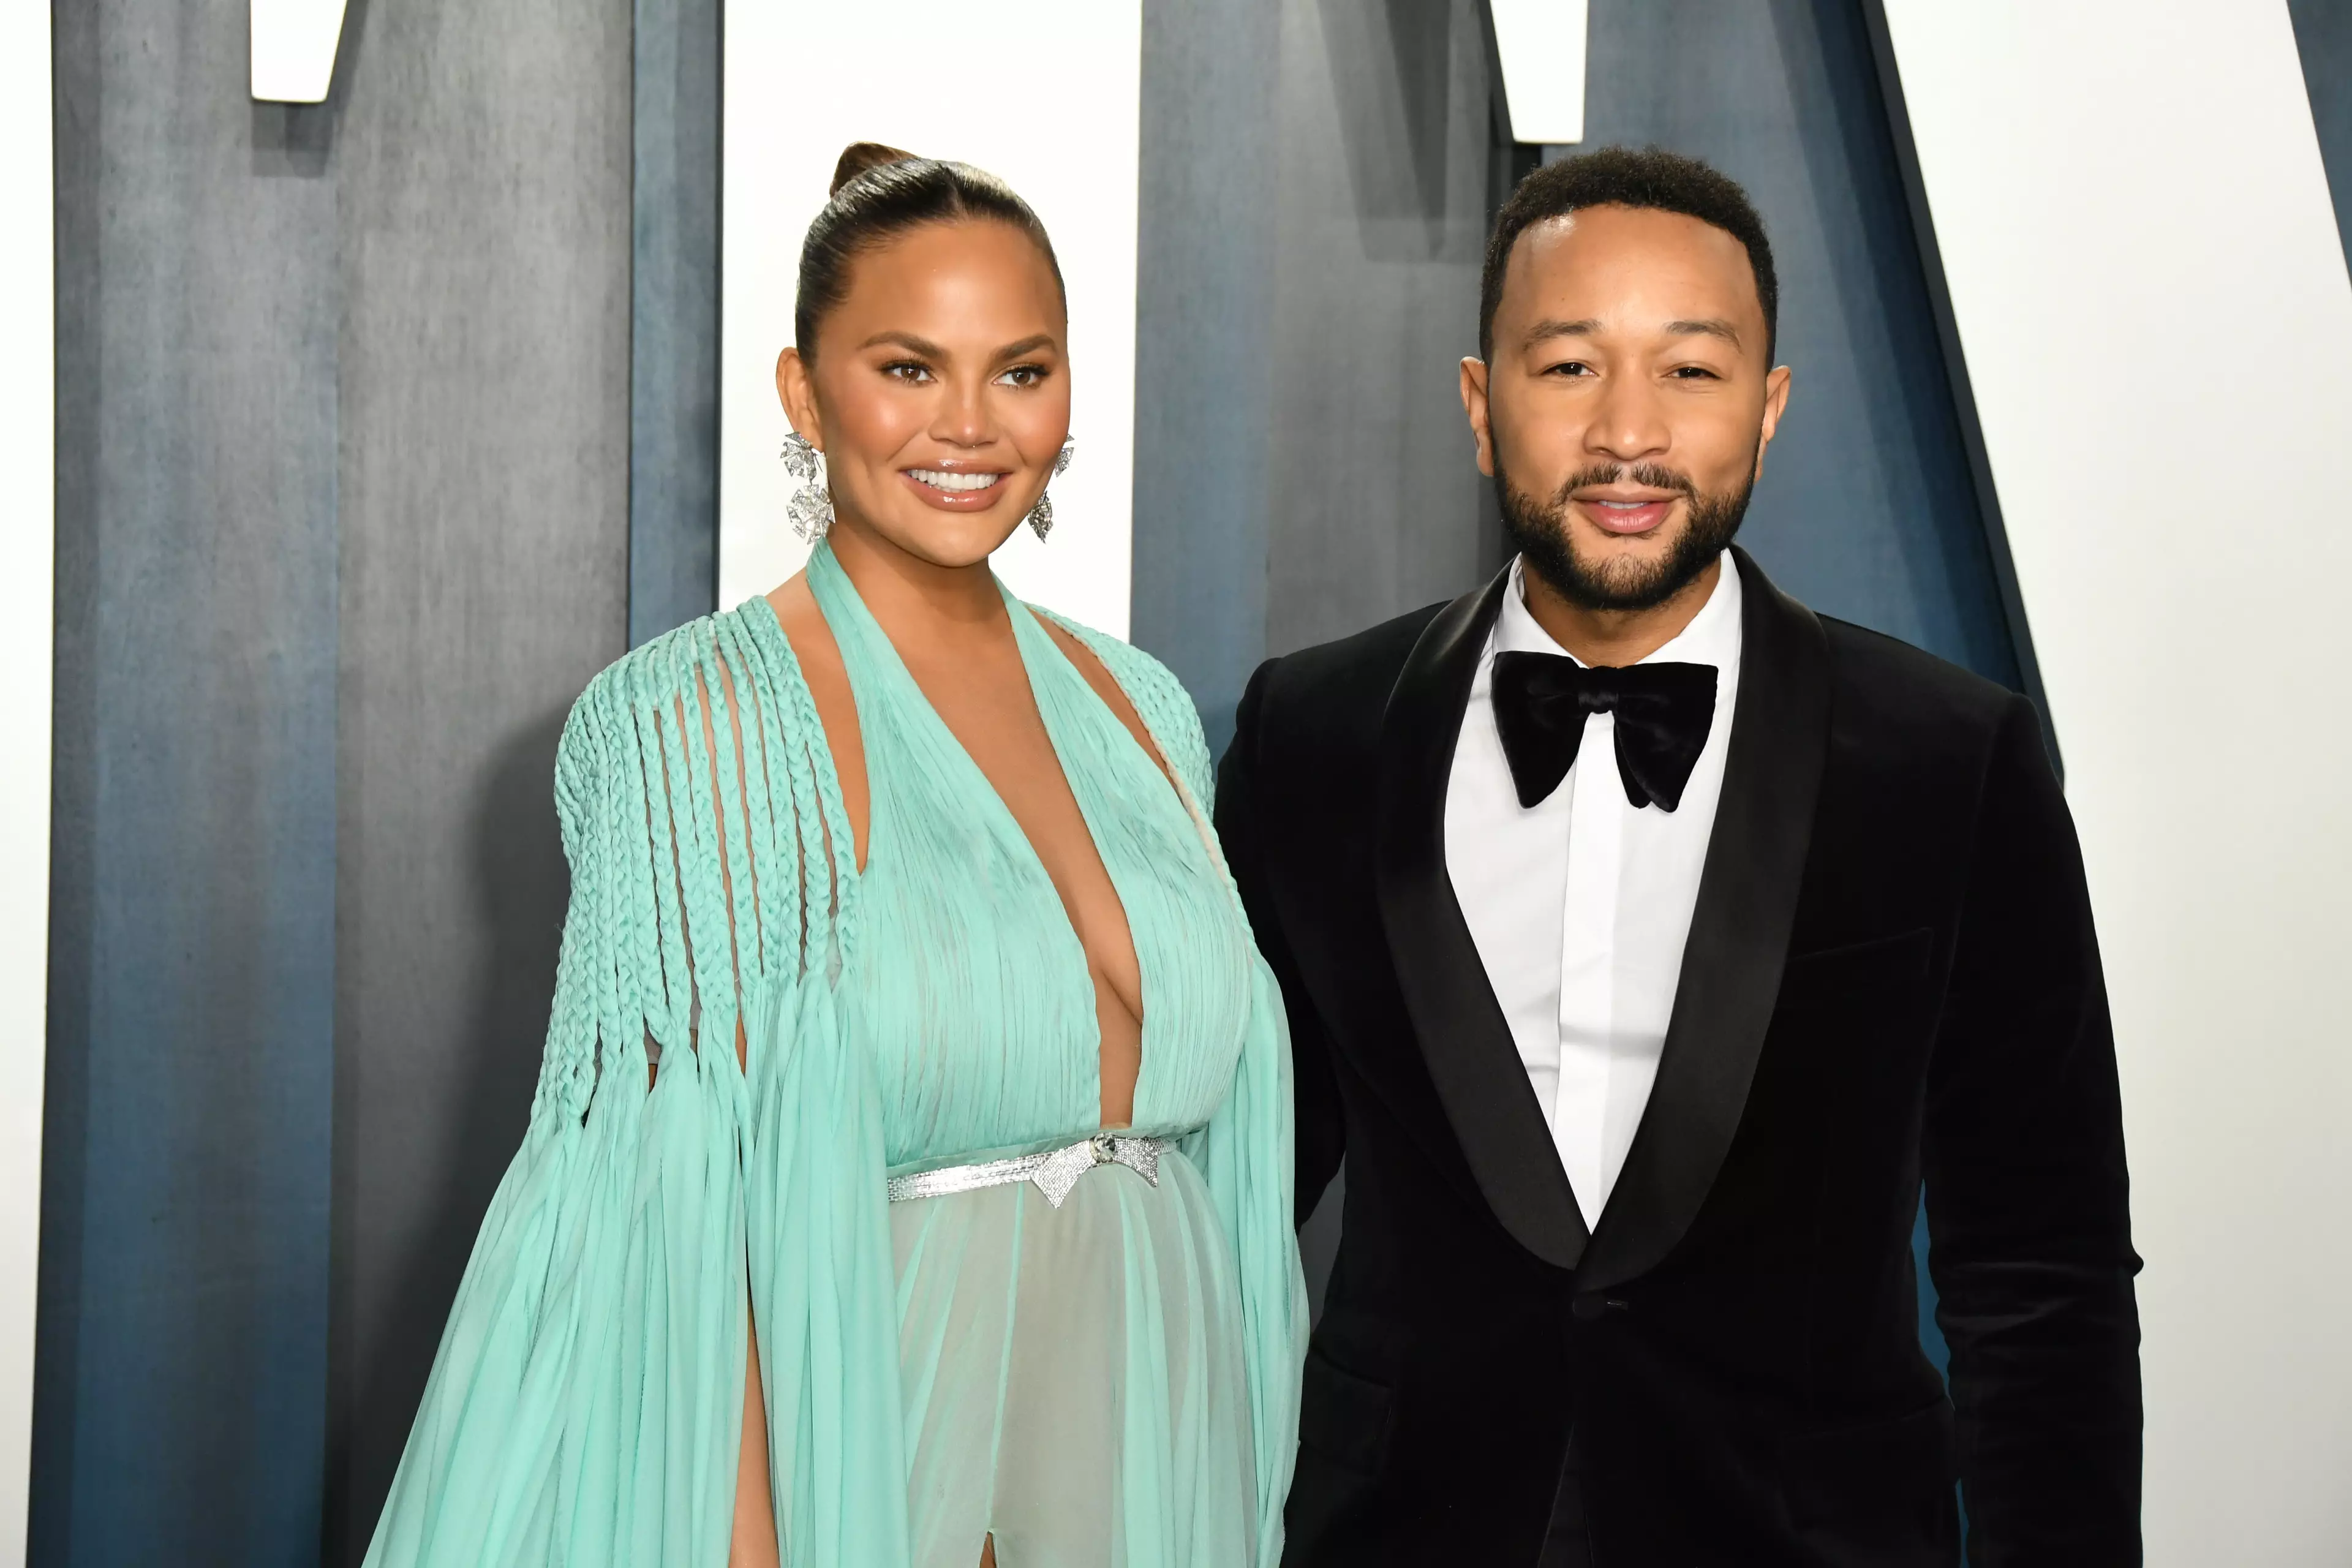 John and his wife Chrissy Teigen were close friends with Kanye and Kim Kardashian.